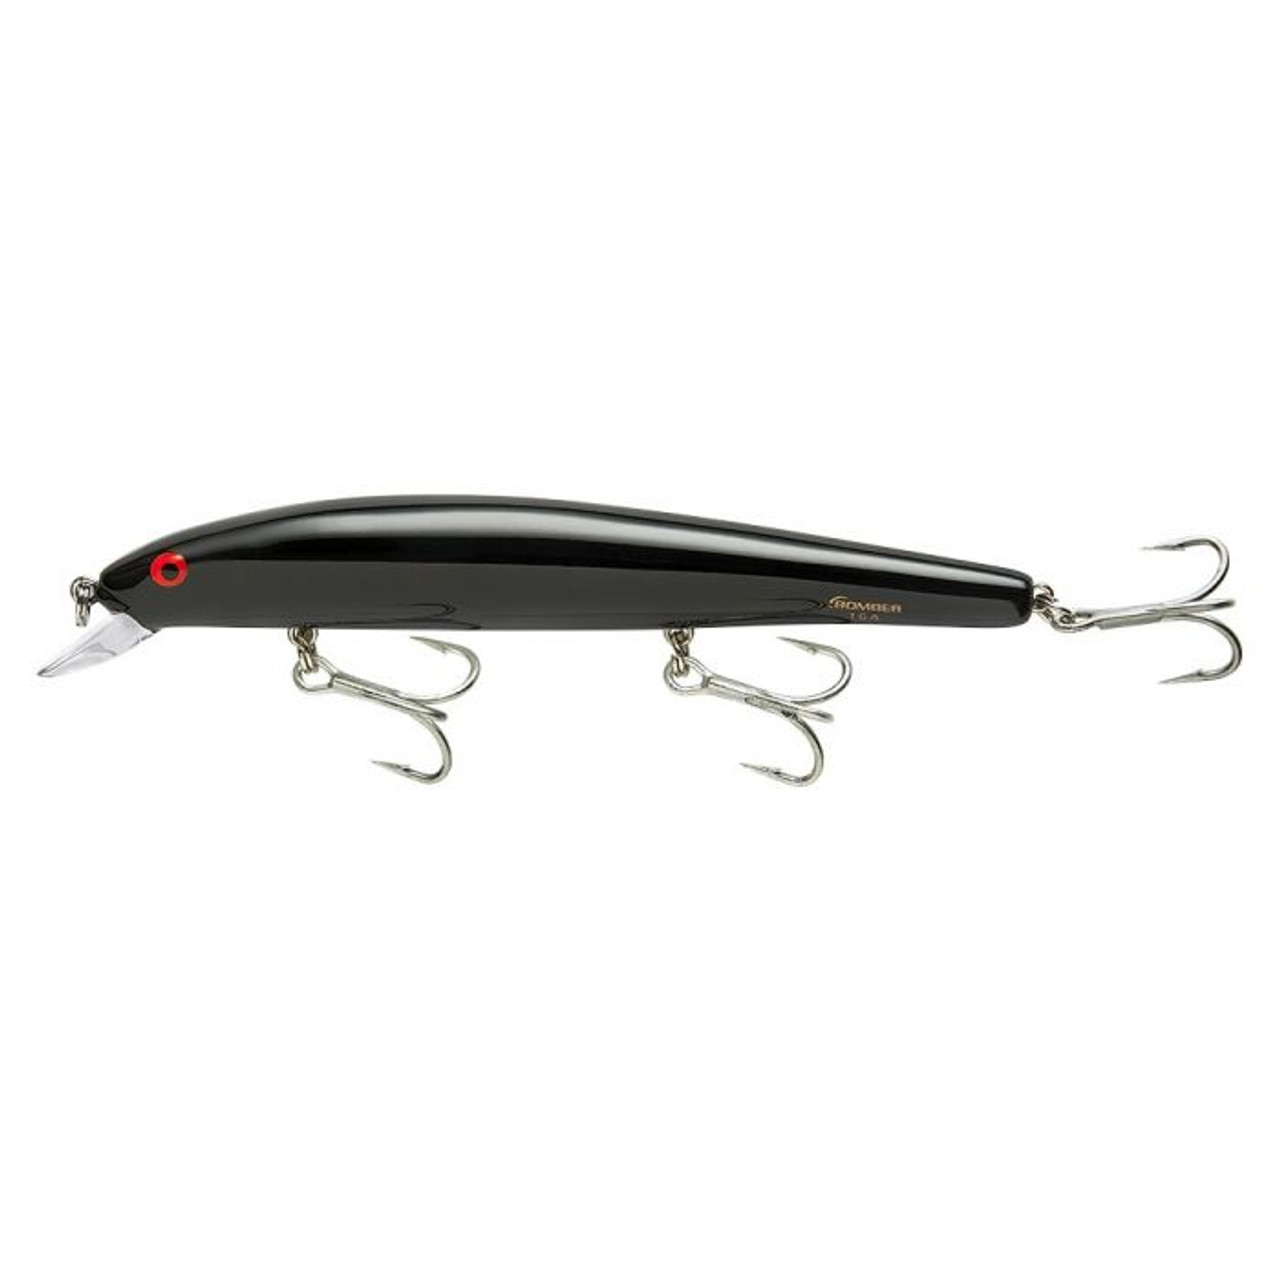 Bomber Lures, Fishing Tackle Deals